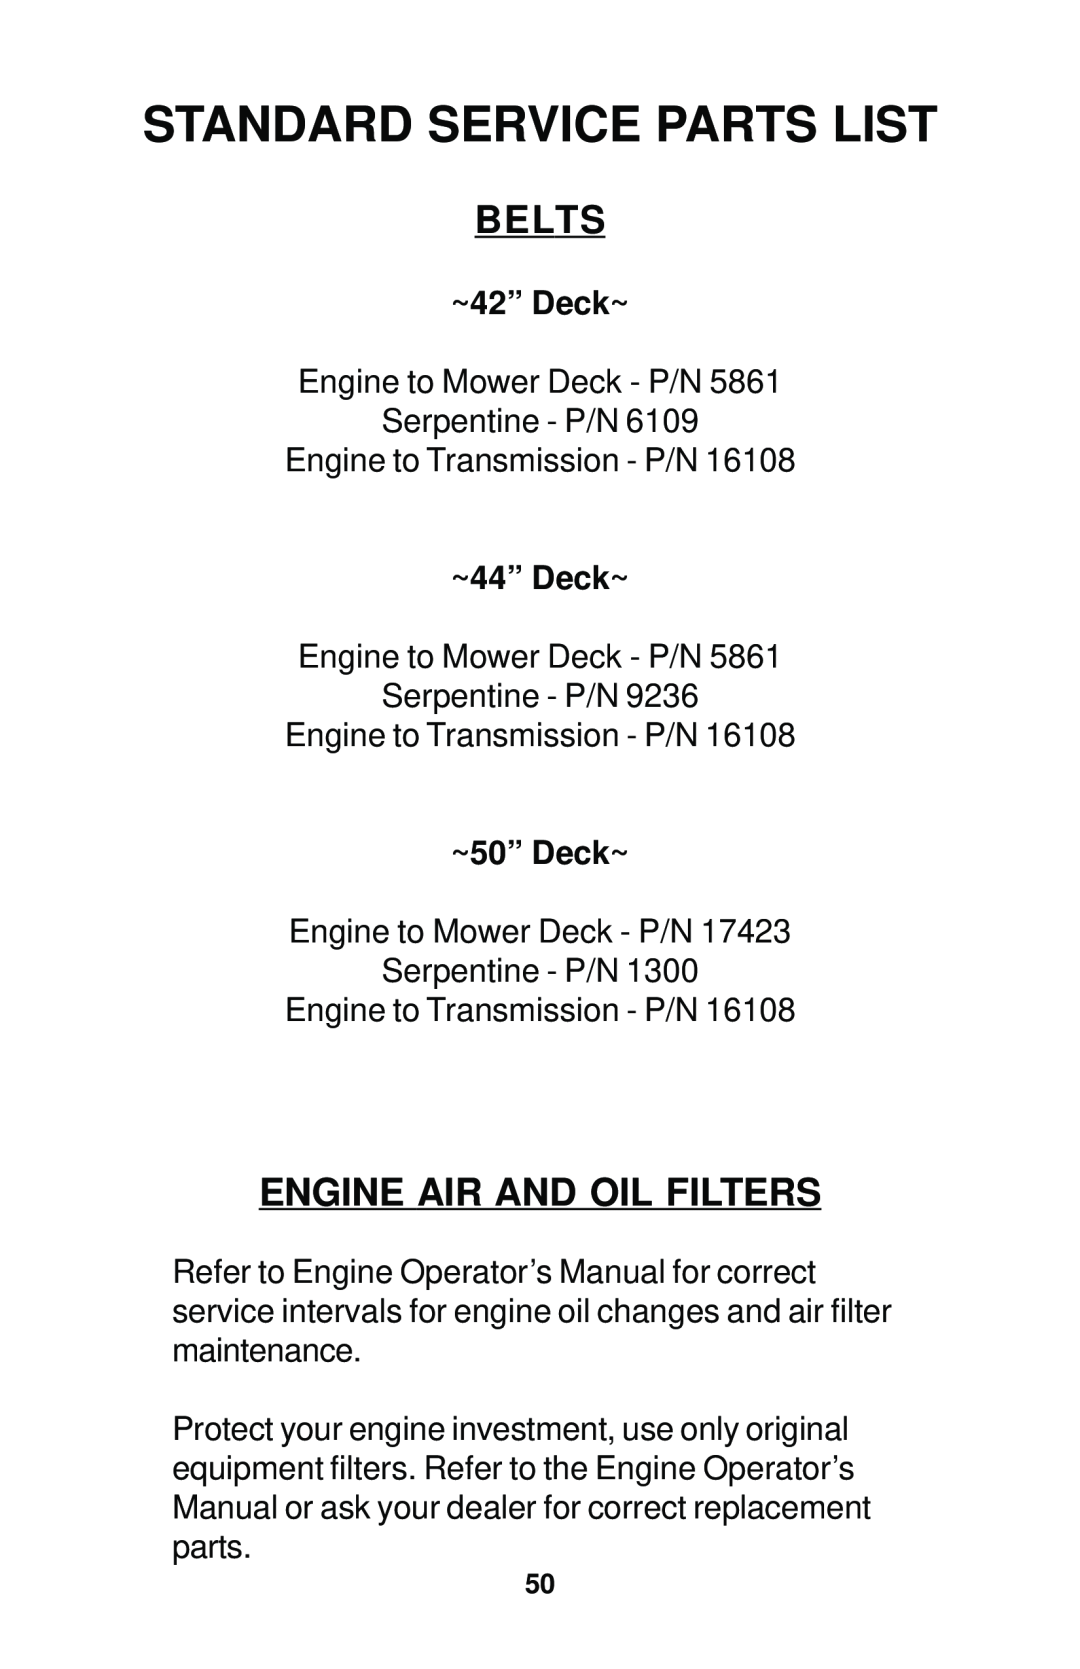 Dixon 42, 44, 50, 44 MAG, 50 MAG Engine Air And Oil Filters, Standard Service Parts List, Belts, ~42” Deck~, ~44” Deck~ 